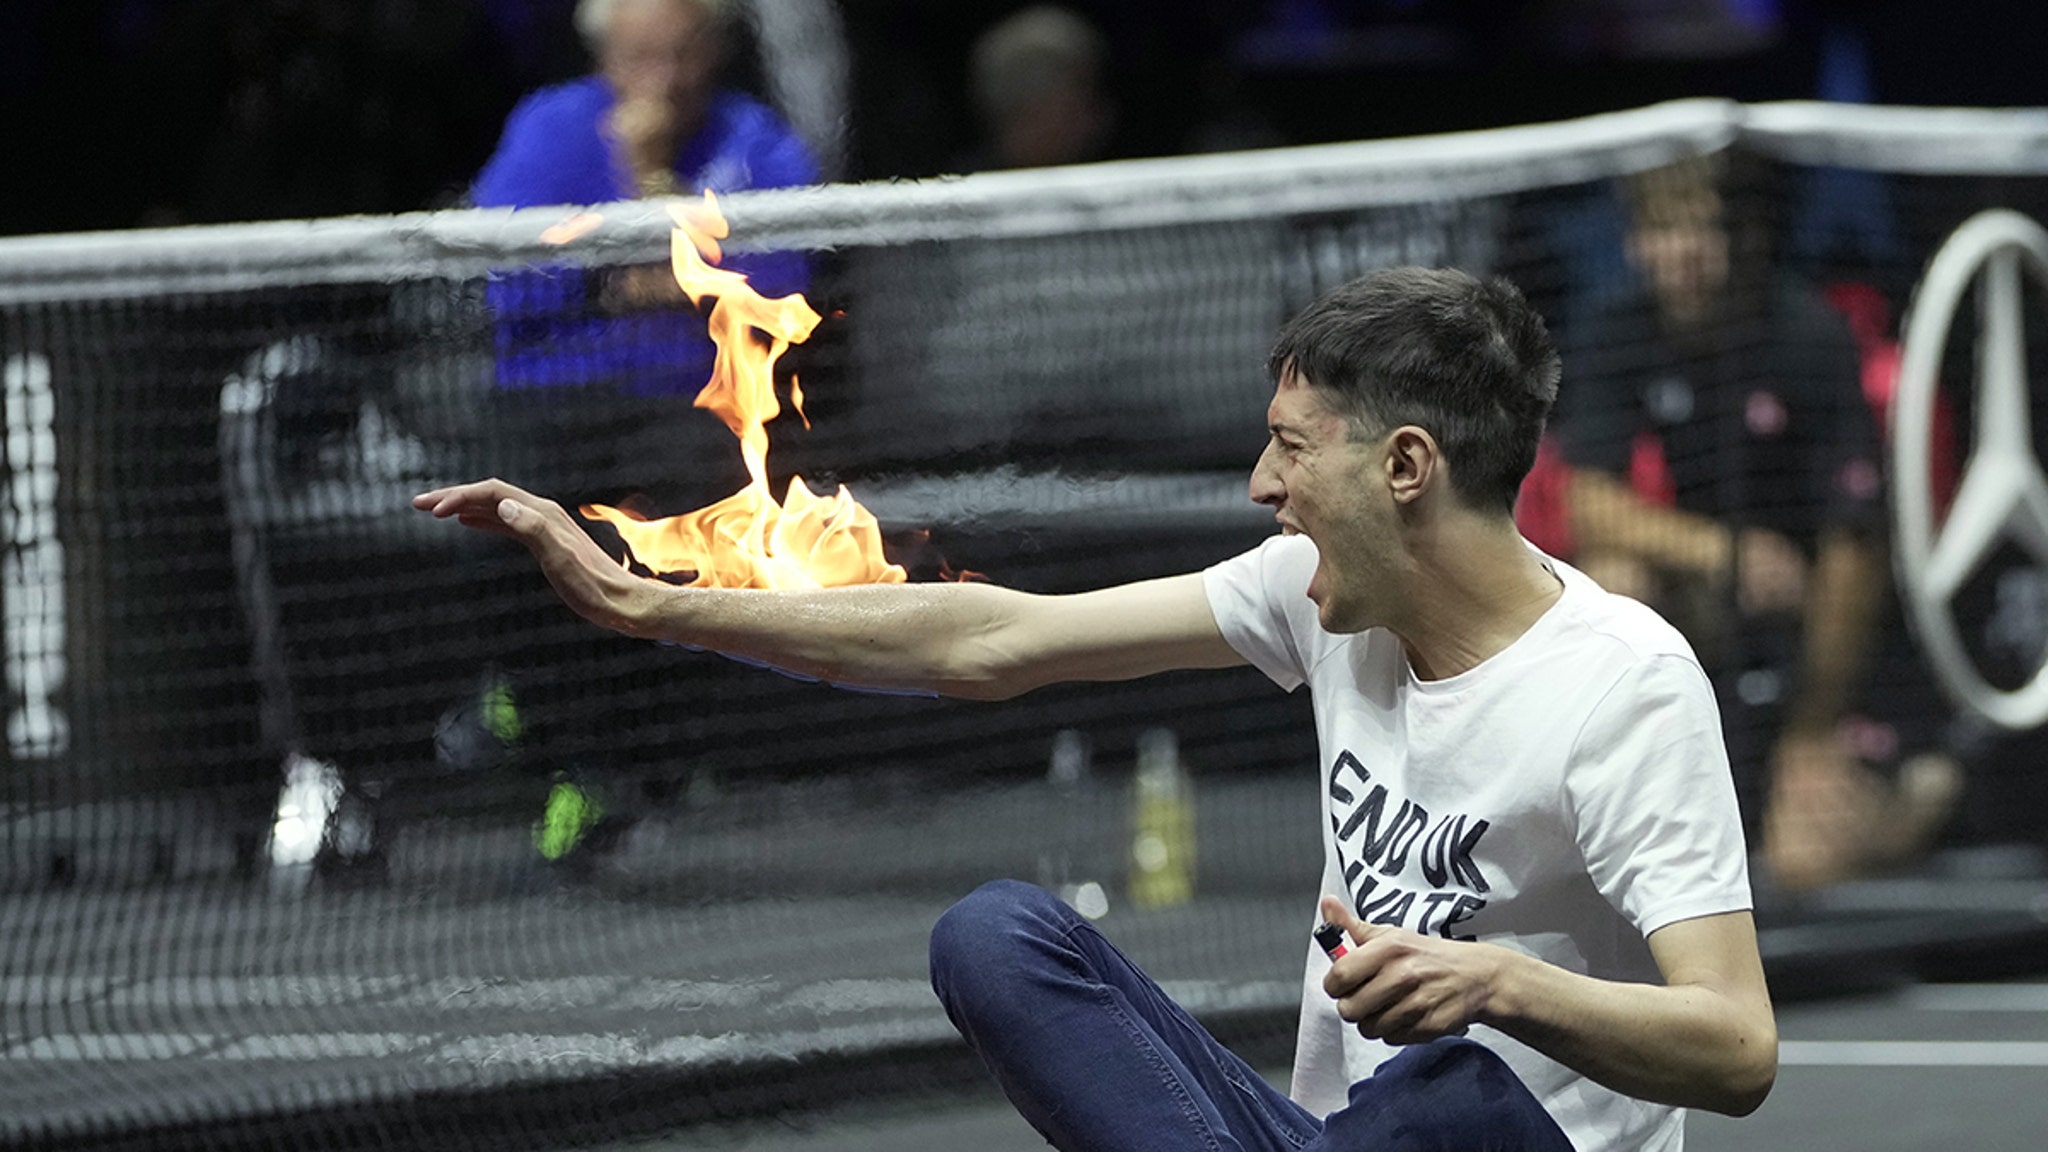 Protester Sets Arm On Fire In Wild Scene At Roger Federer’s Last Tournament